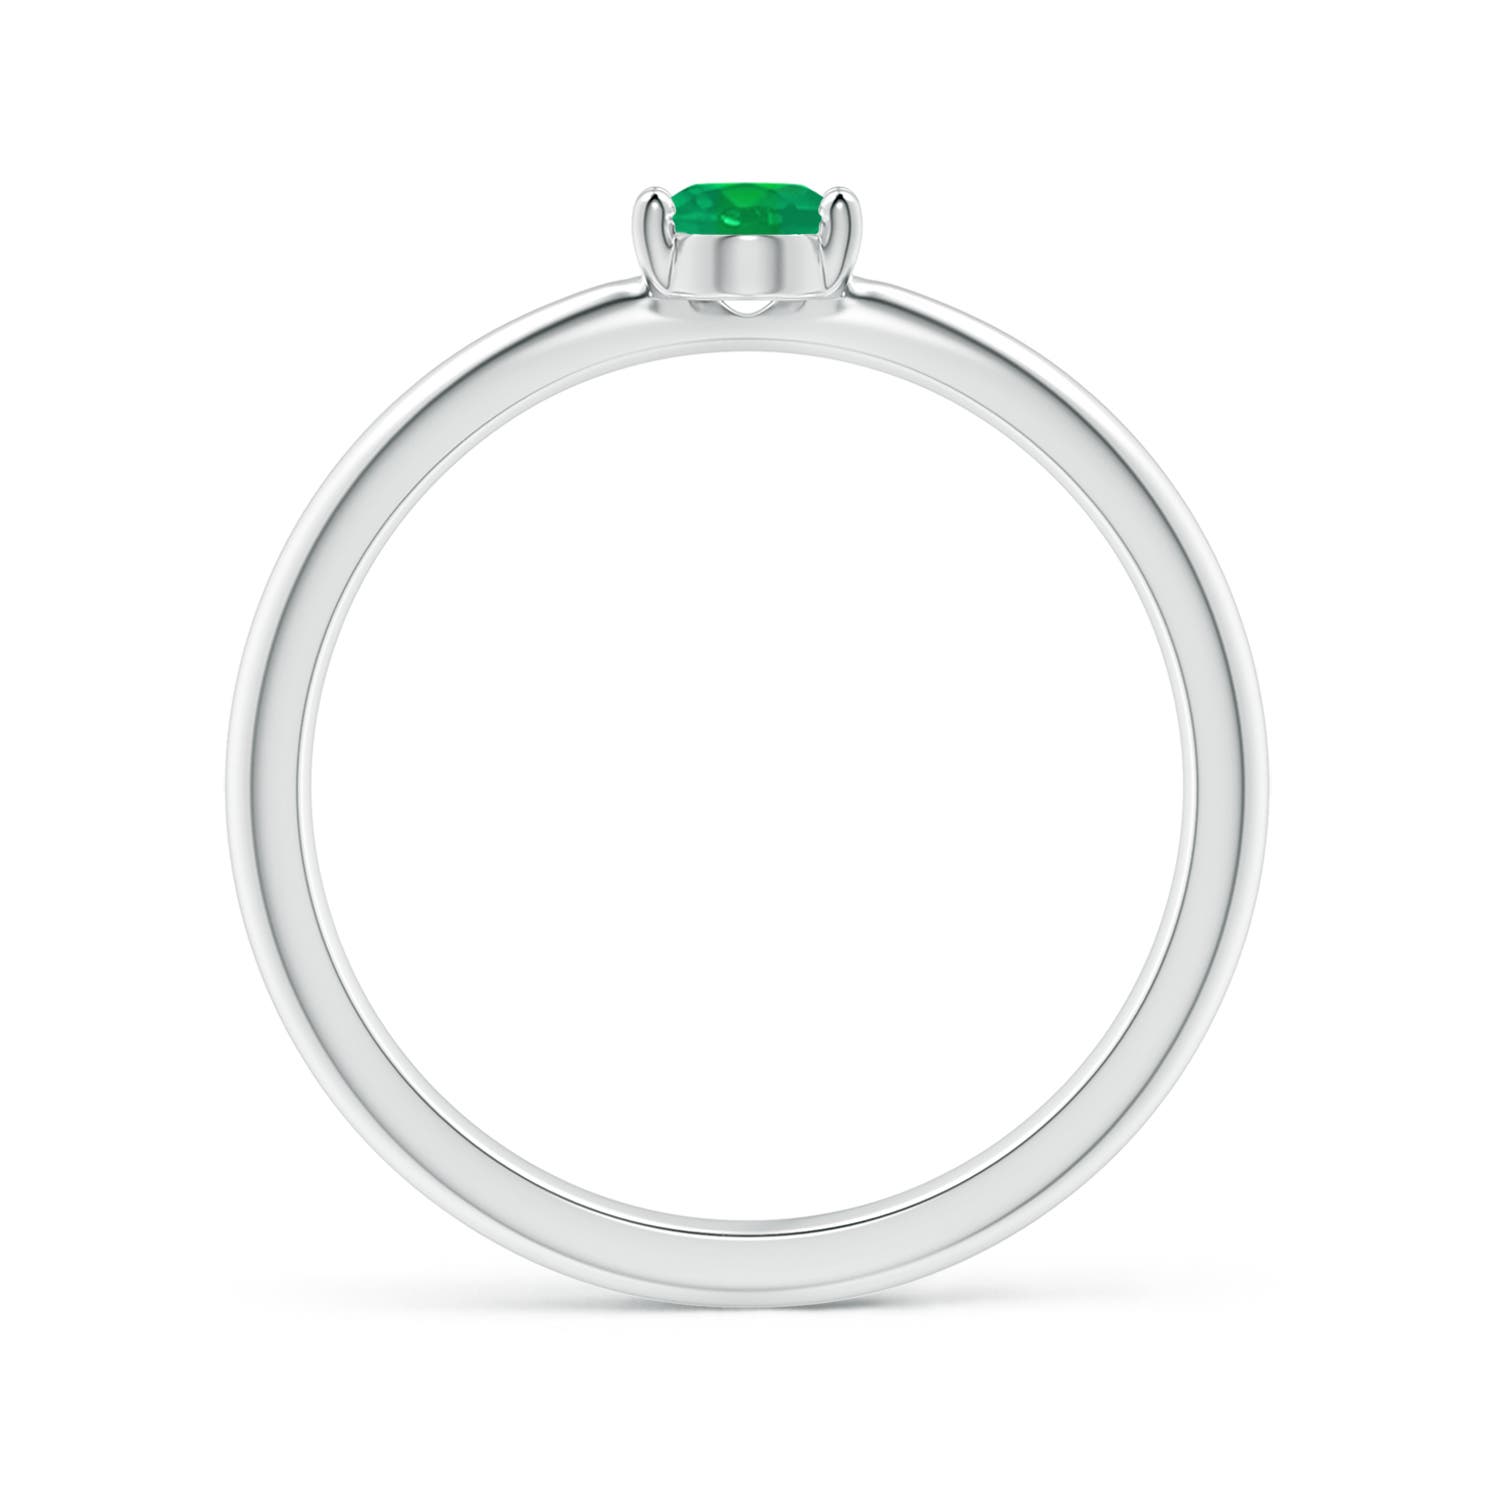 AA - Emerald / 0.4 CT / 14 KT White Gold